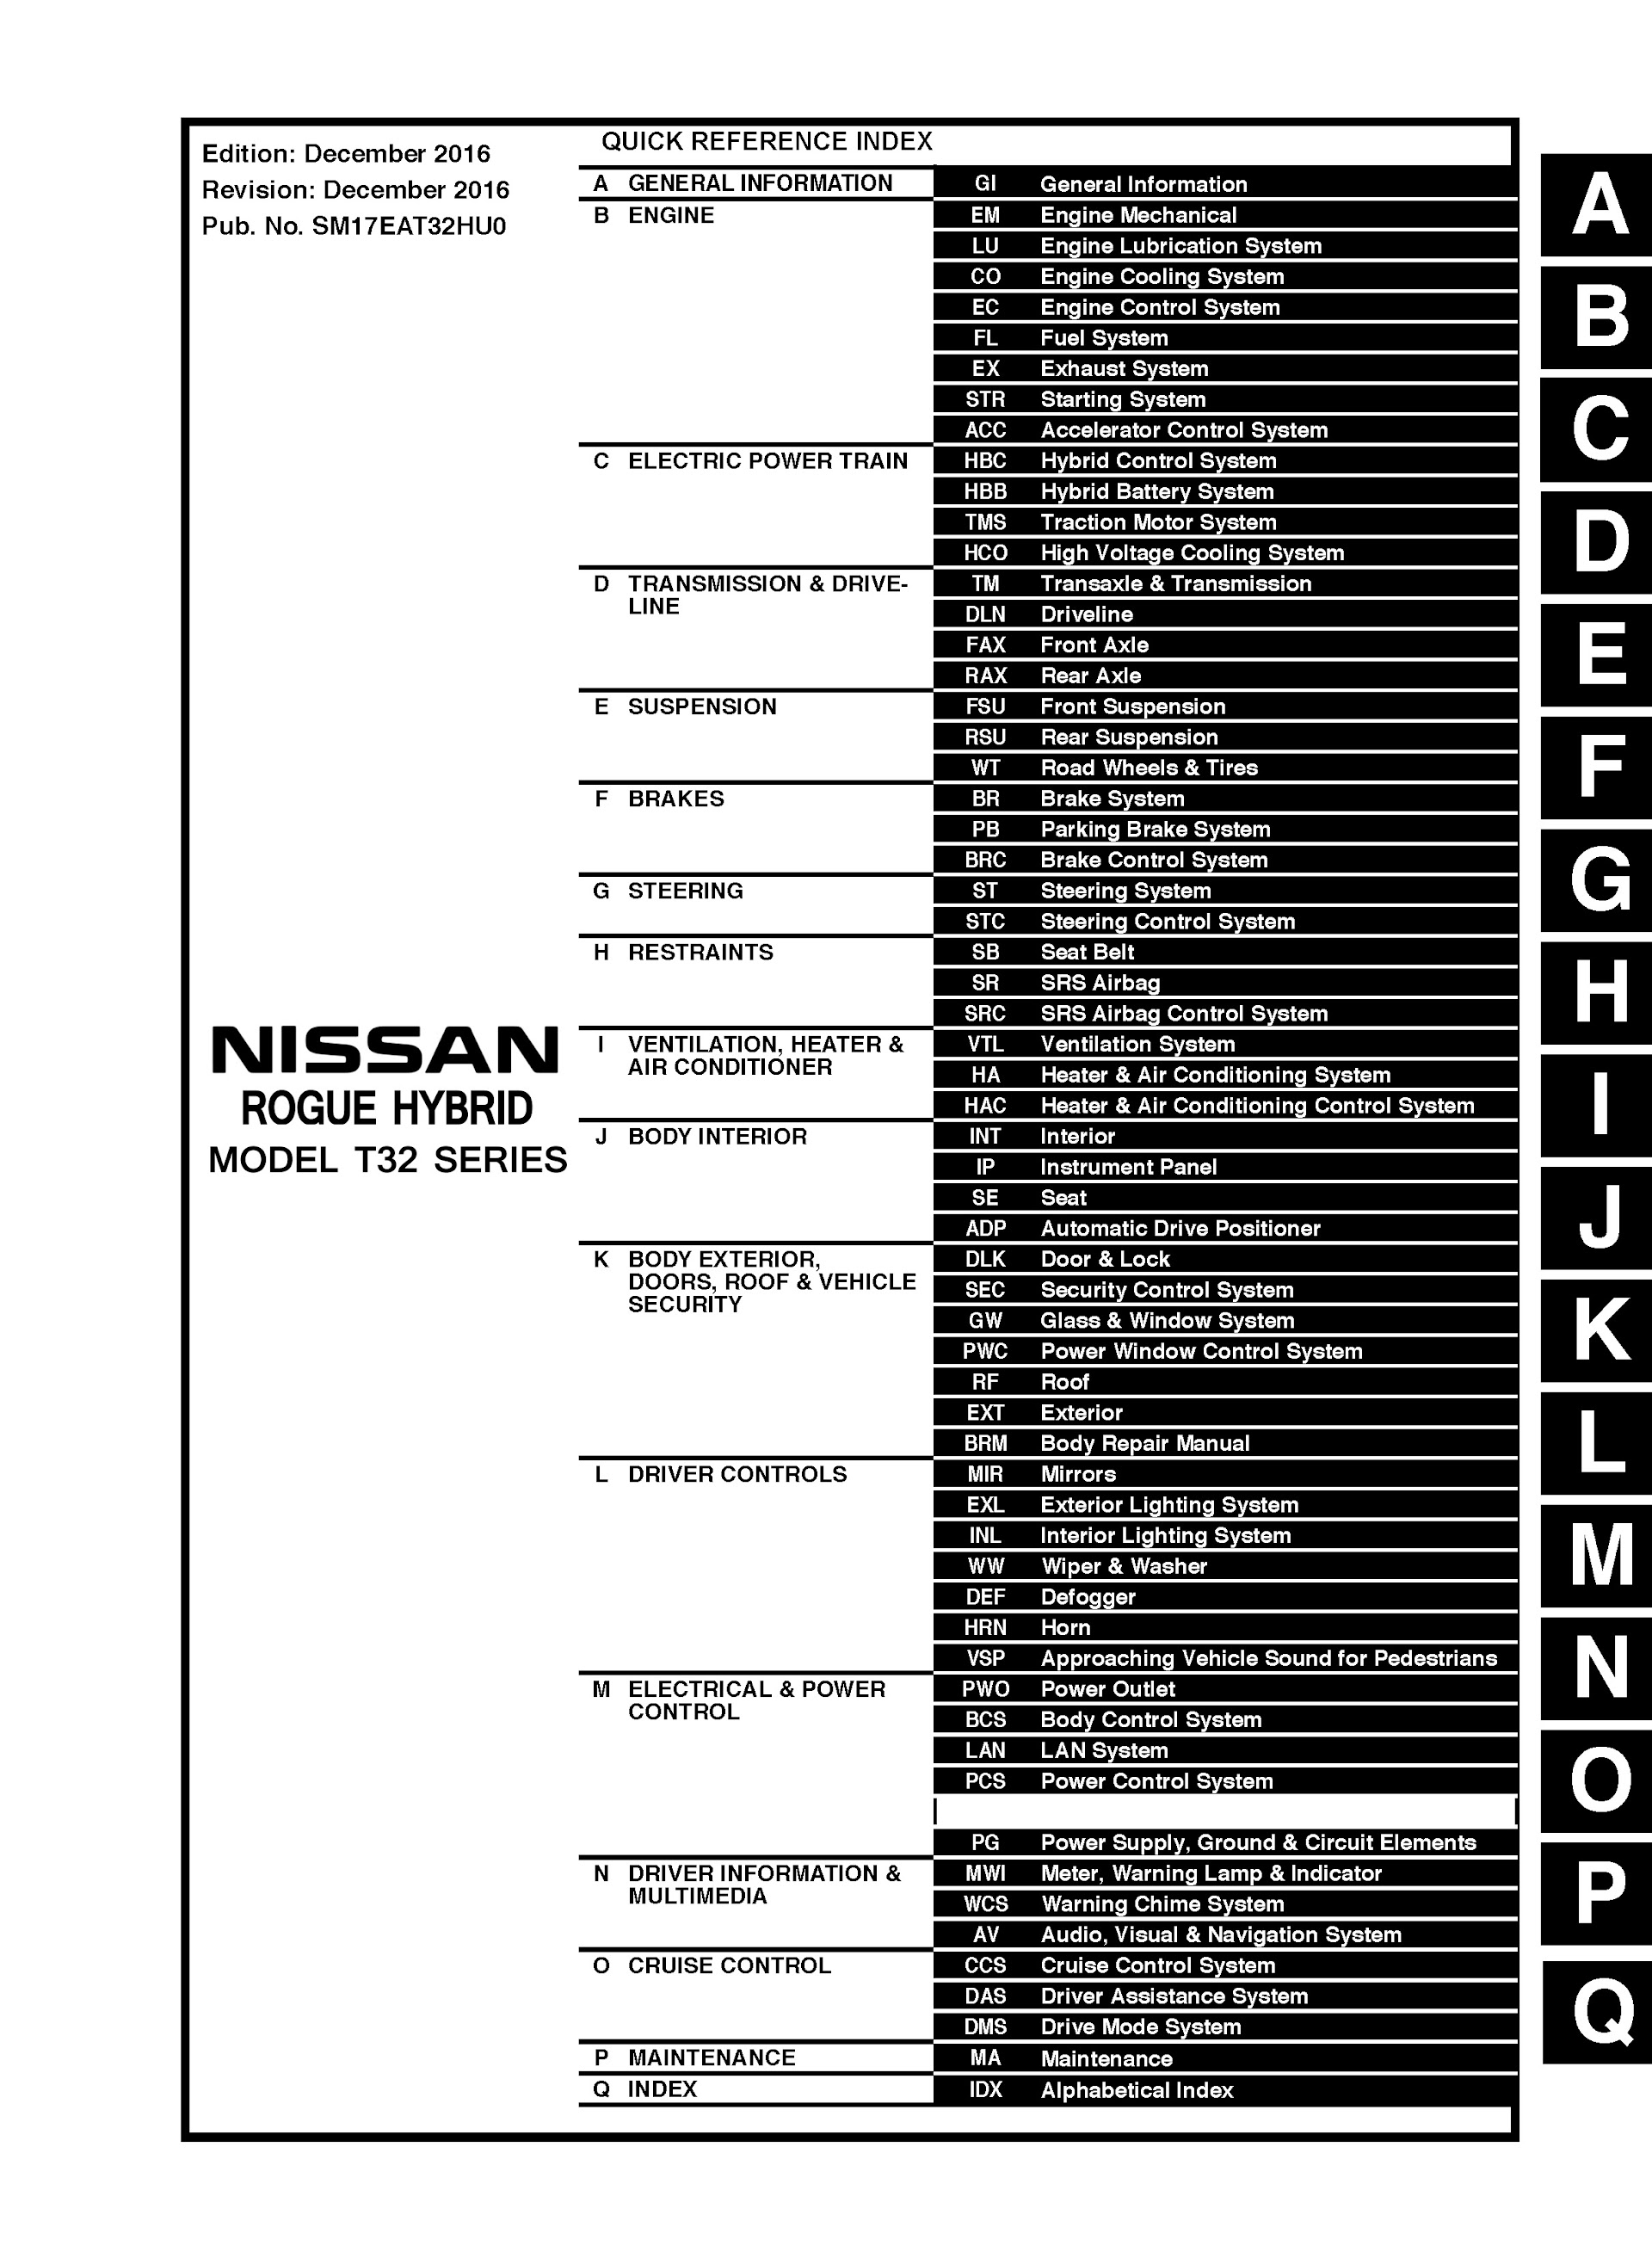 Table of Contents 2017-2020 Nissan Rogue Hybrid Model T32 Series Repair Manual